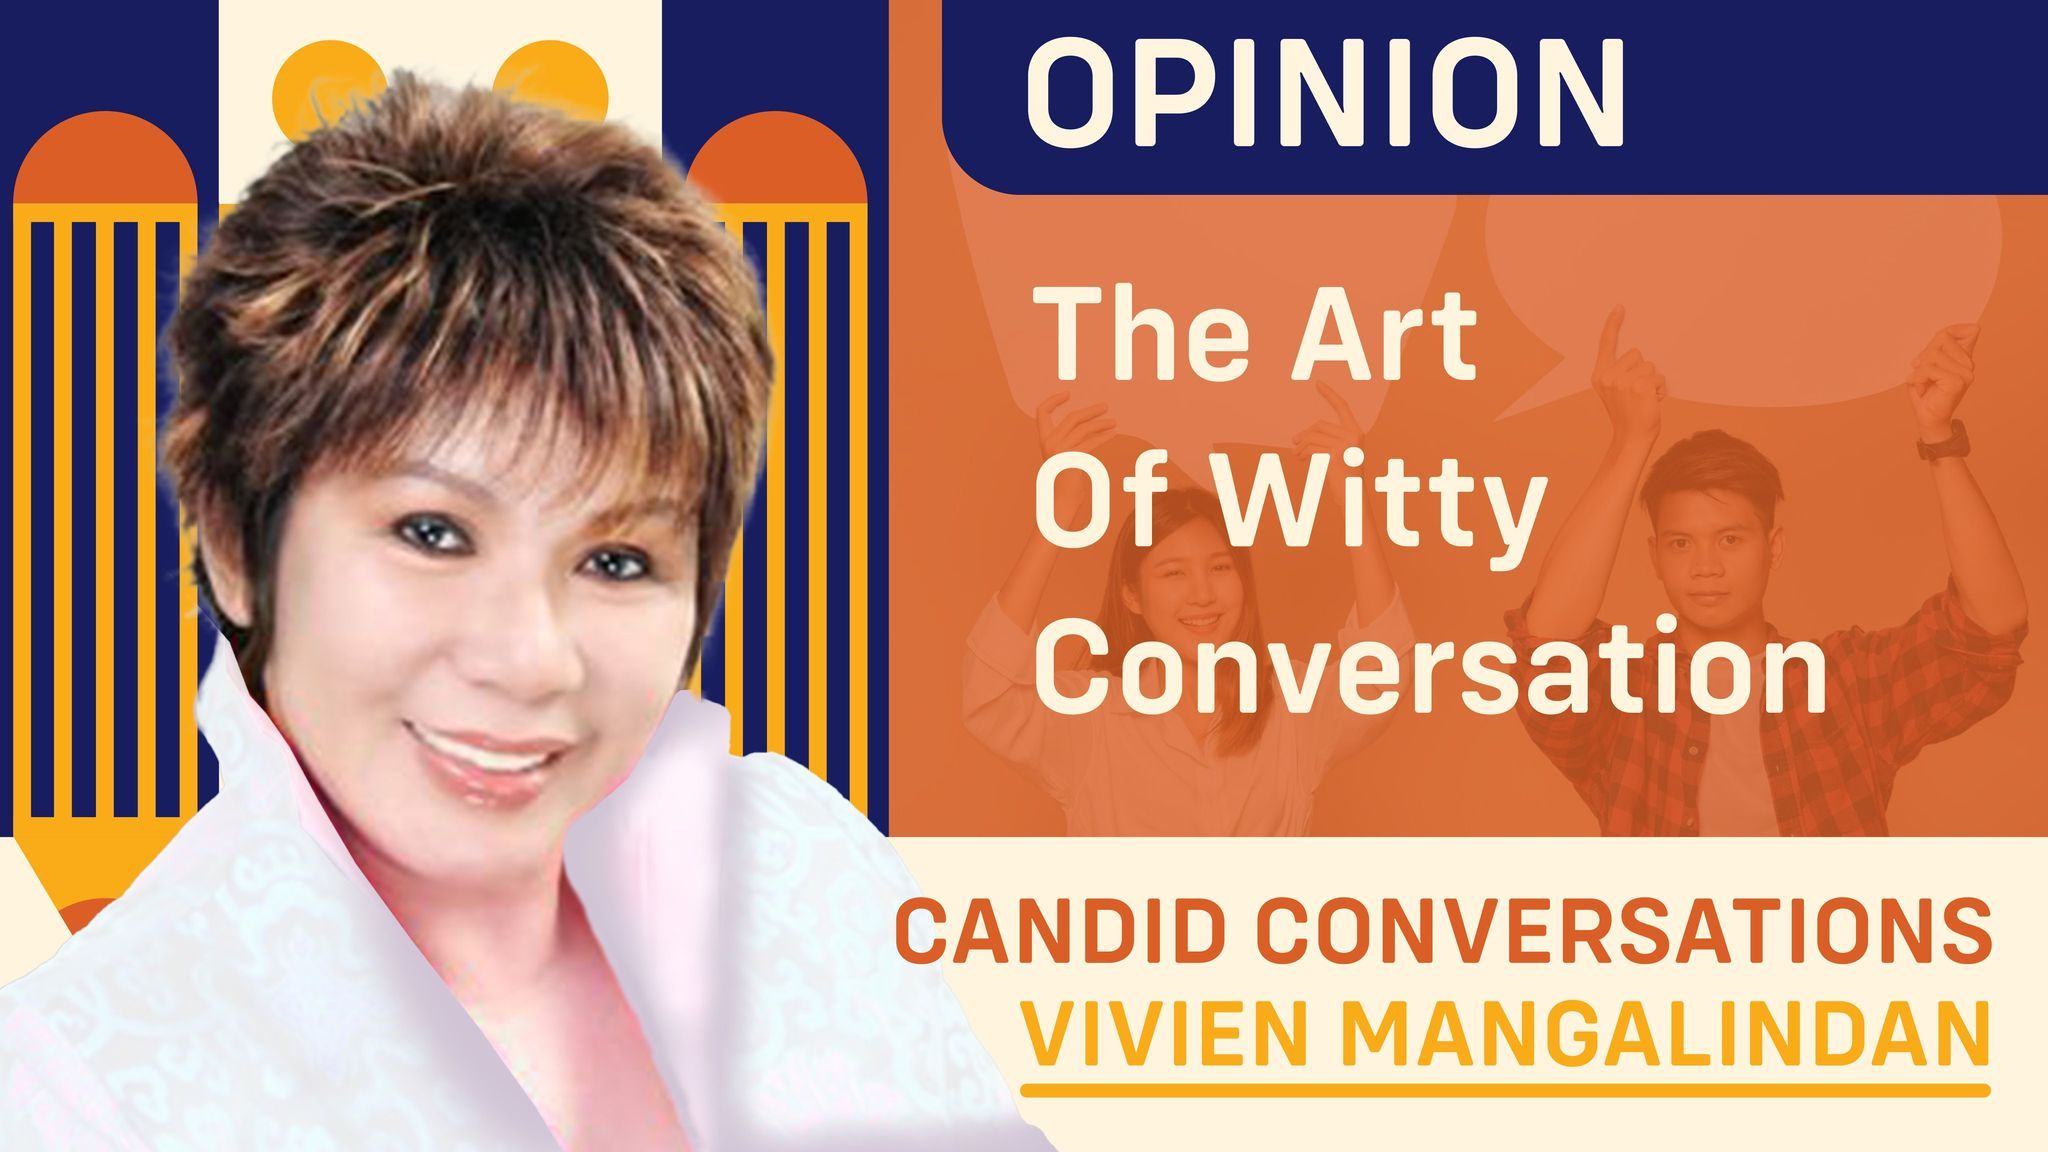 The art of witty conversation